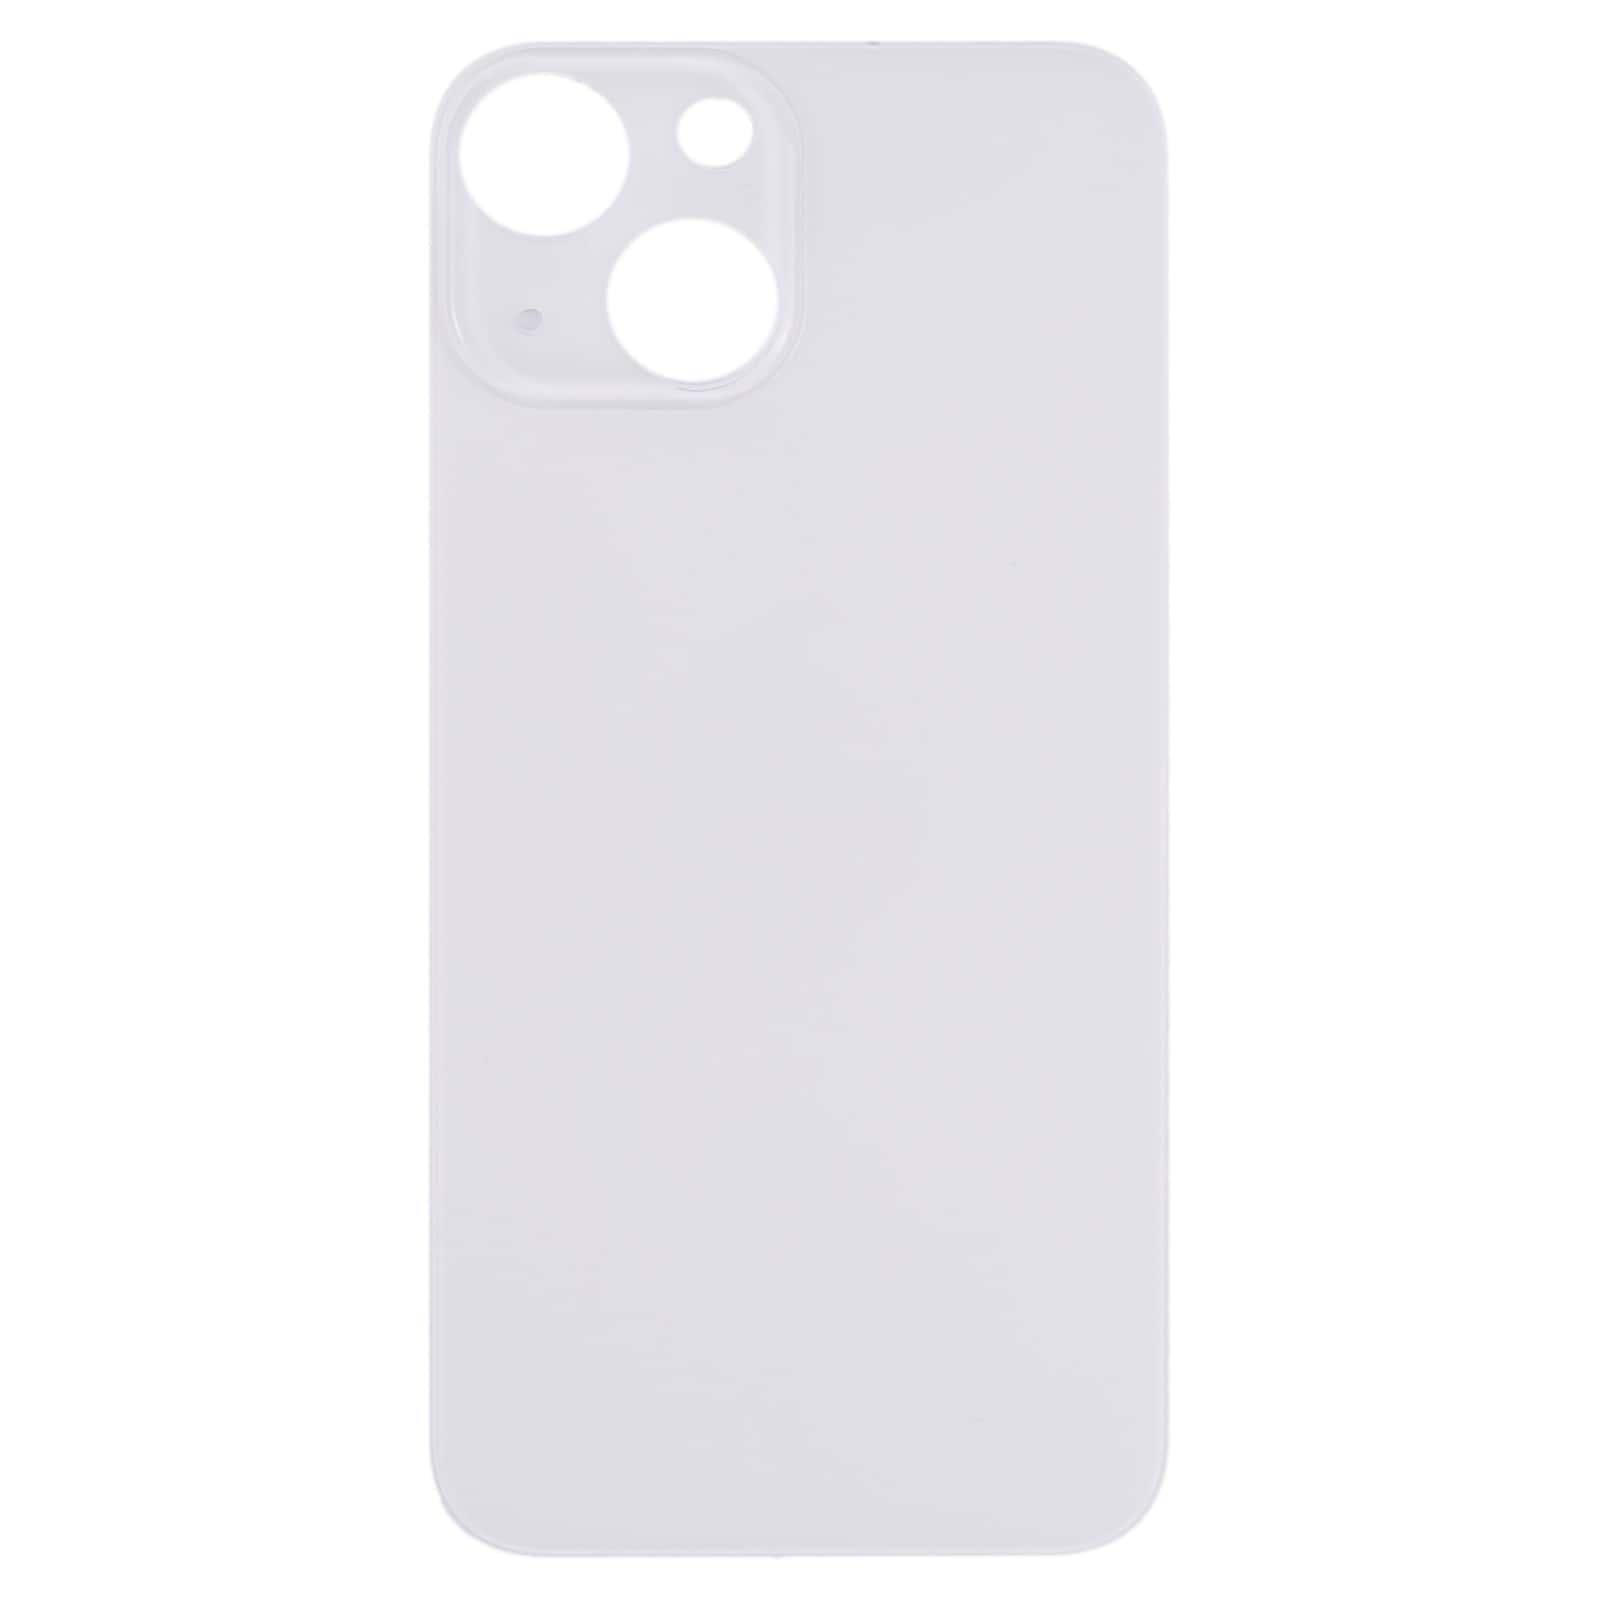 Back Glass Panel for  iPhone 13 mini White